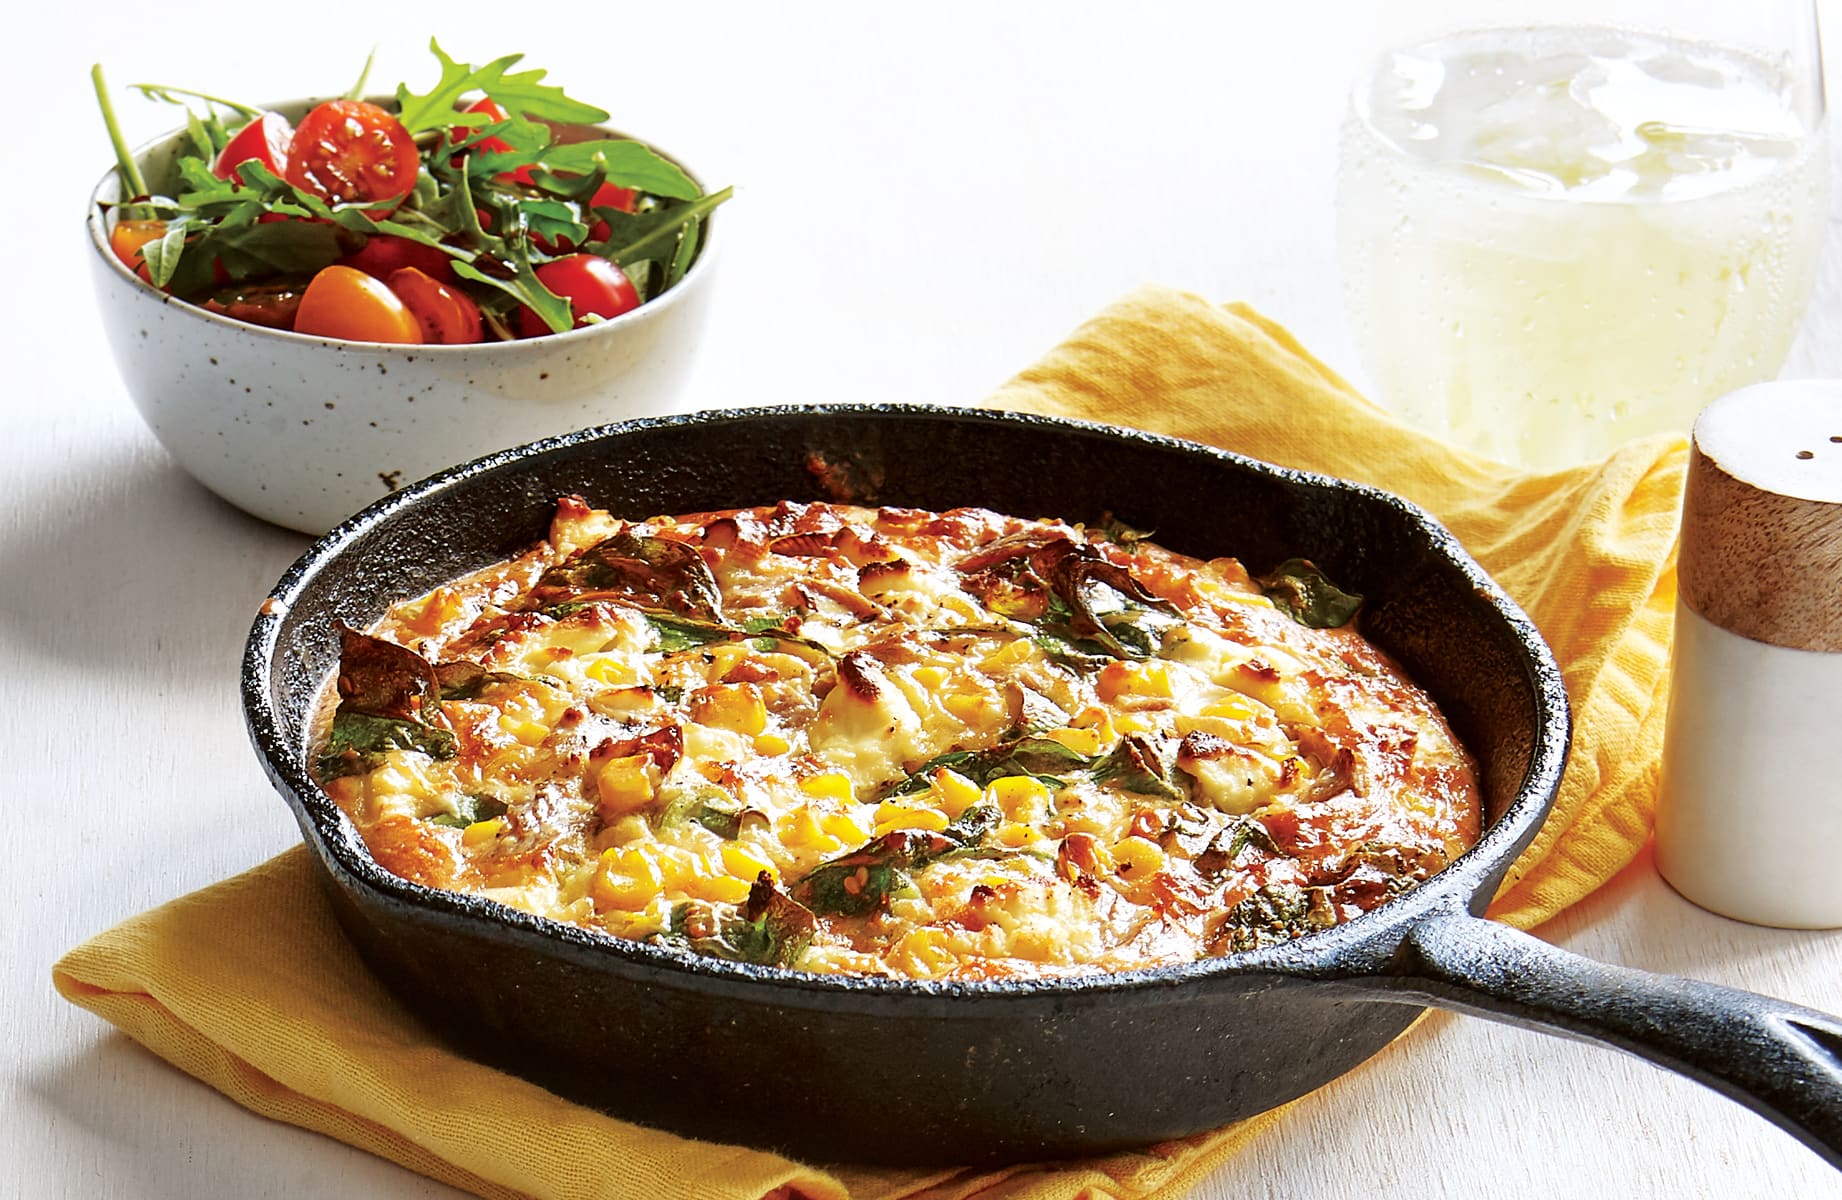 Cast Iron Skillet Frittata - Country at Heart Recipes